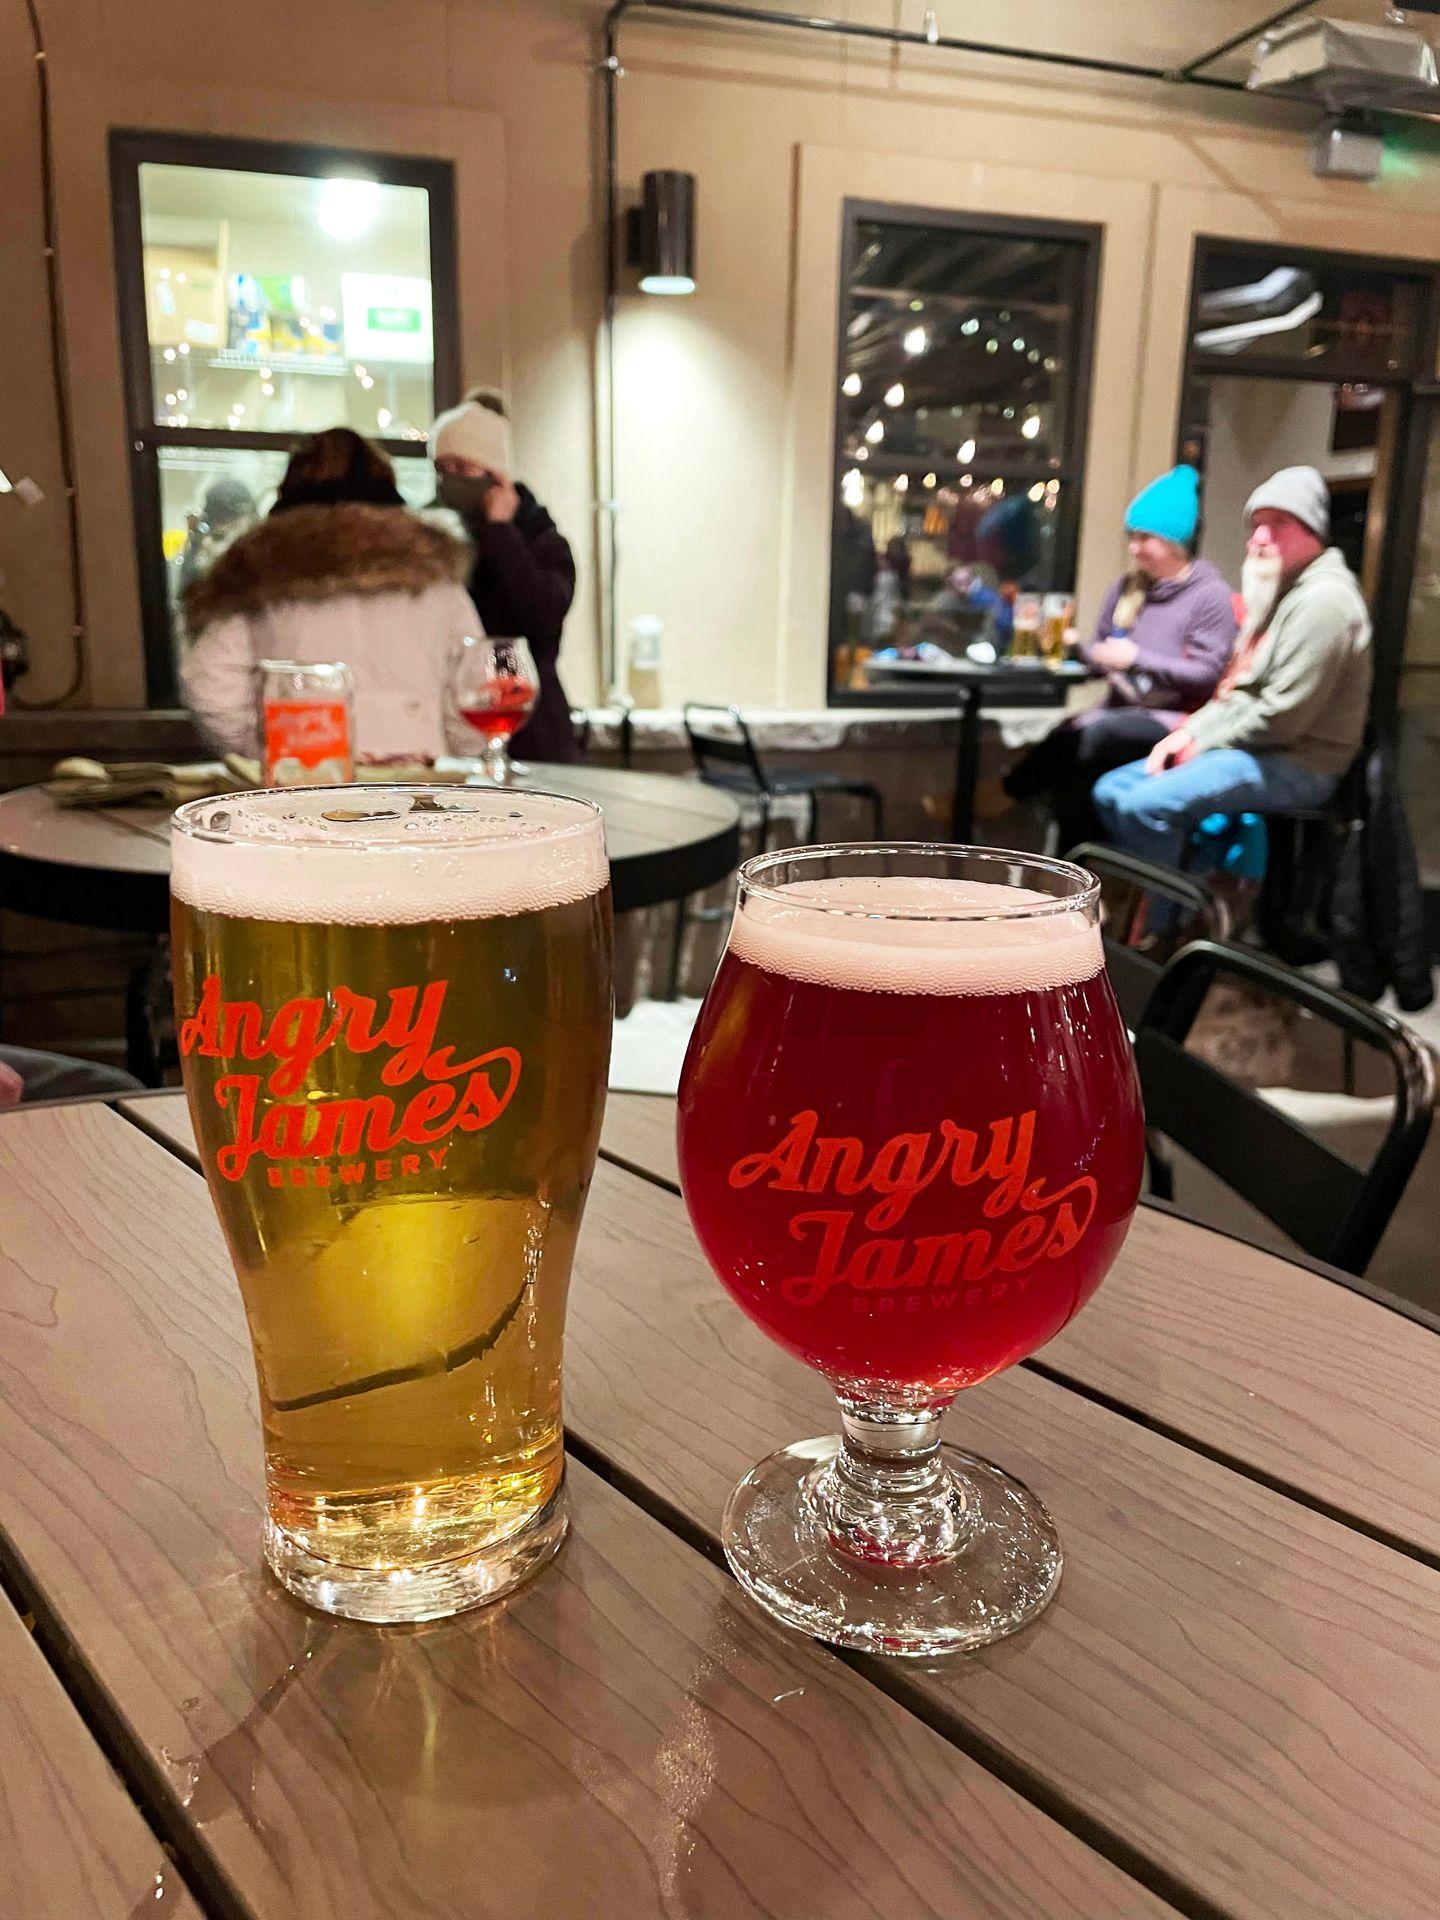 Two glasses of beer on a barrel in Angry James brewery.